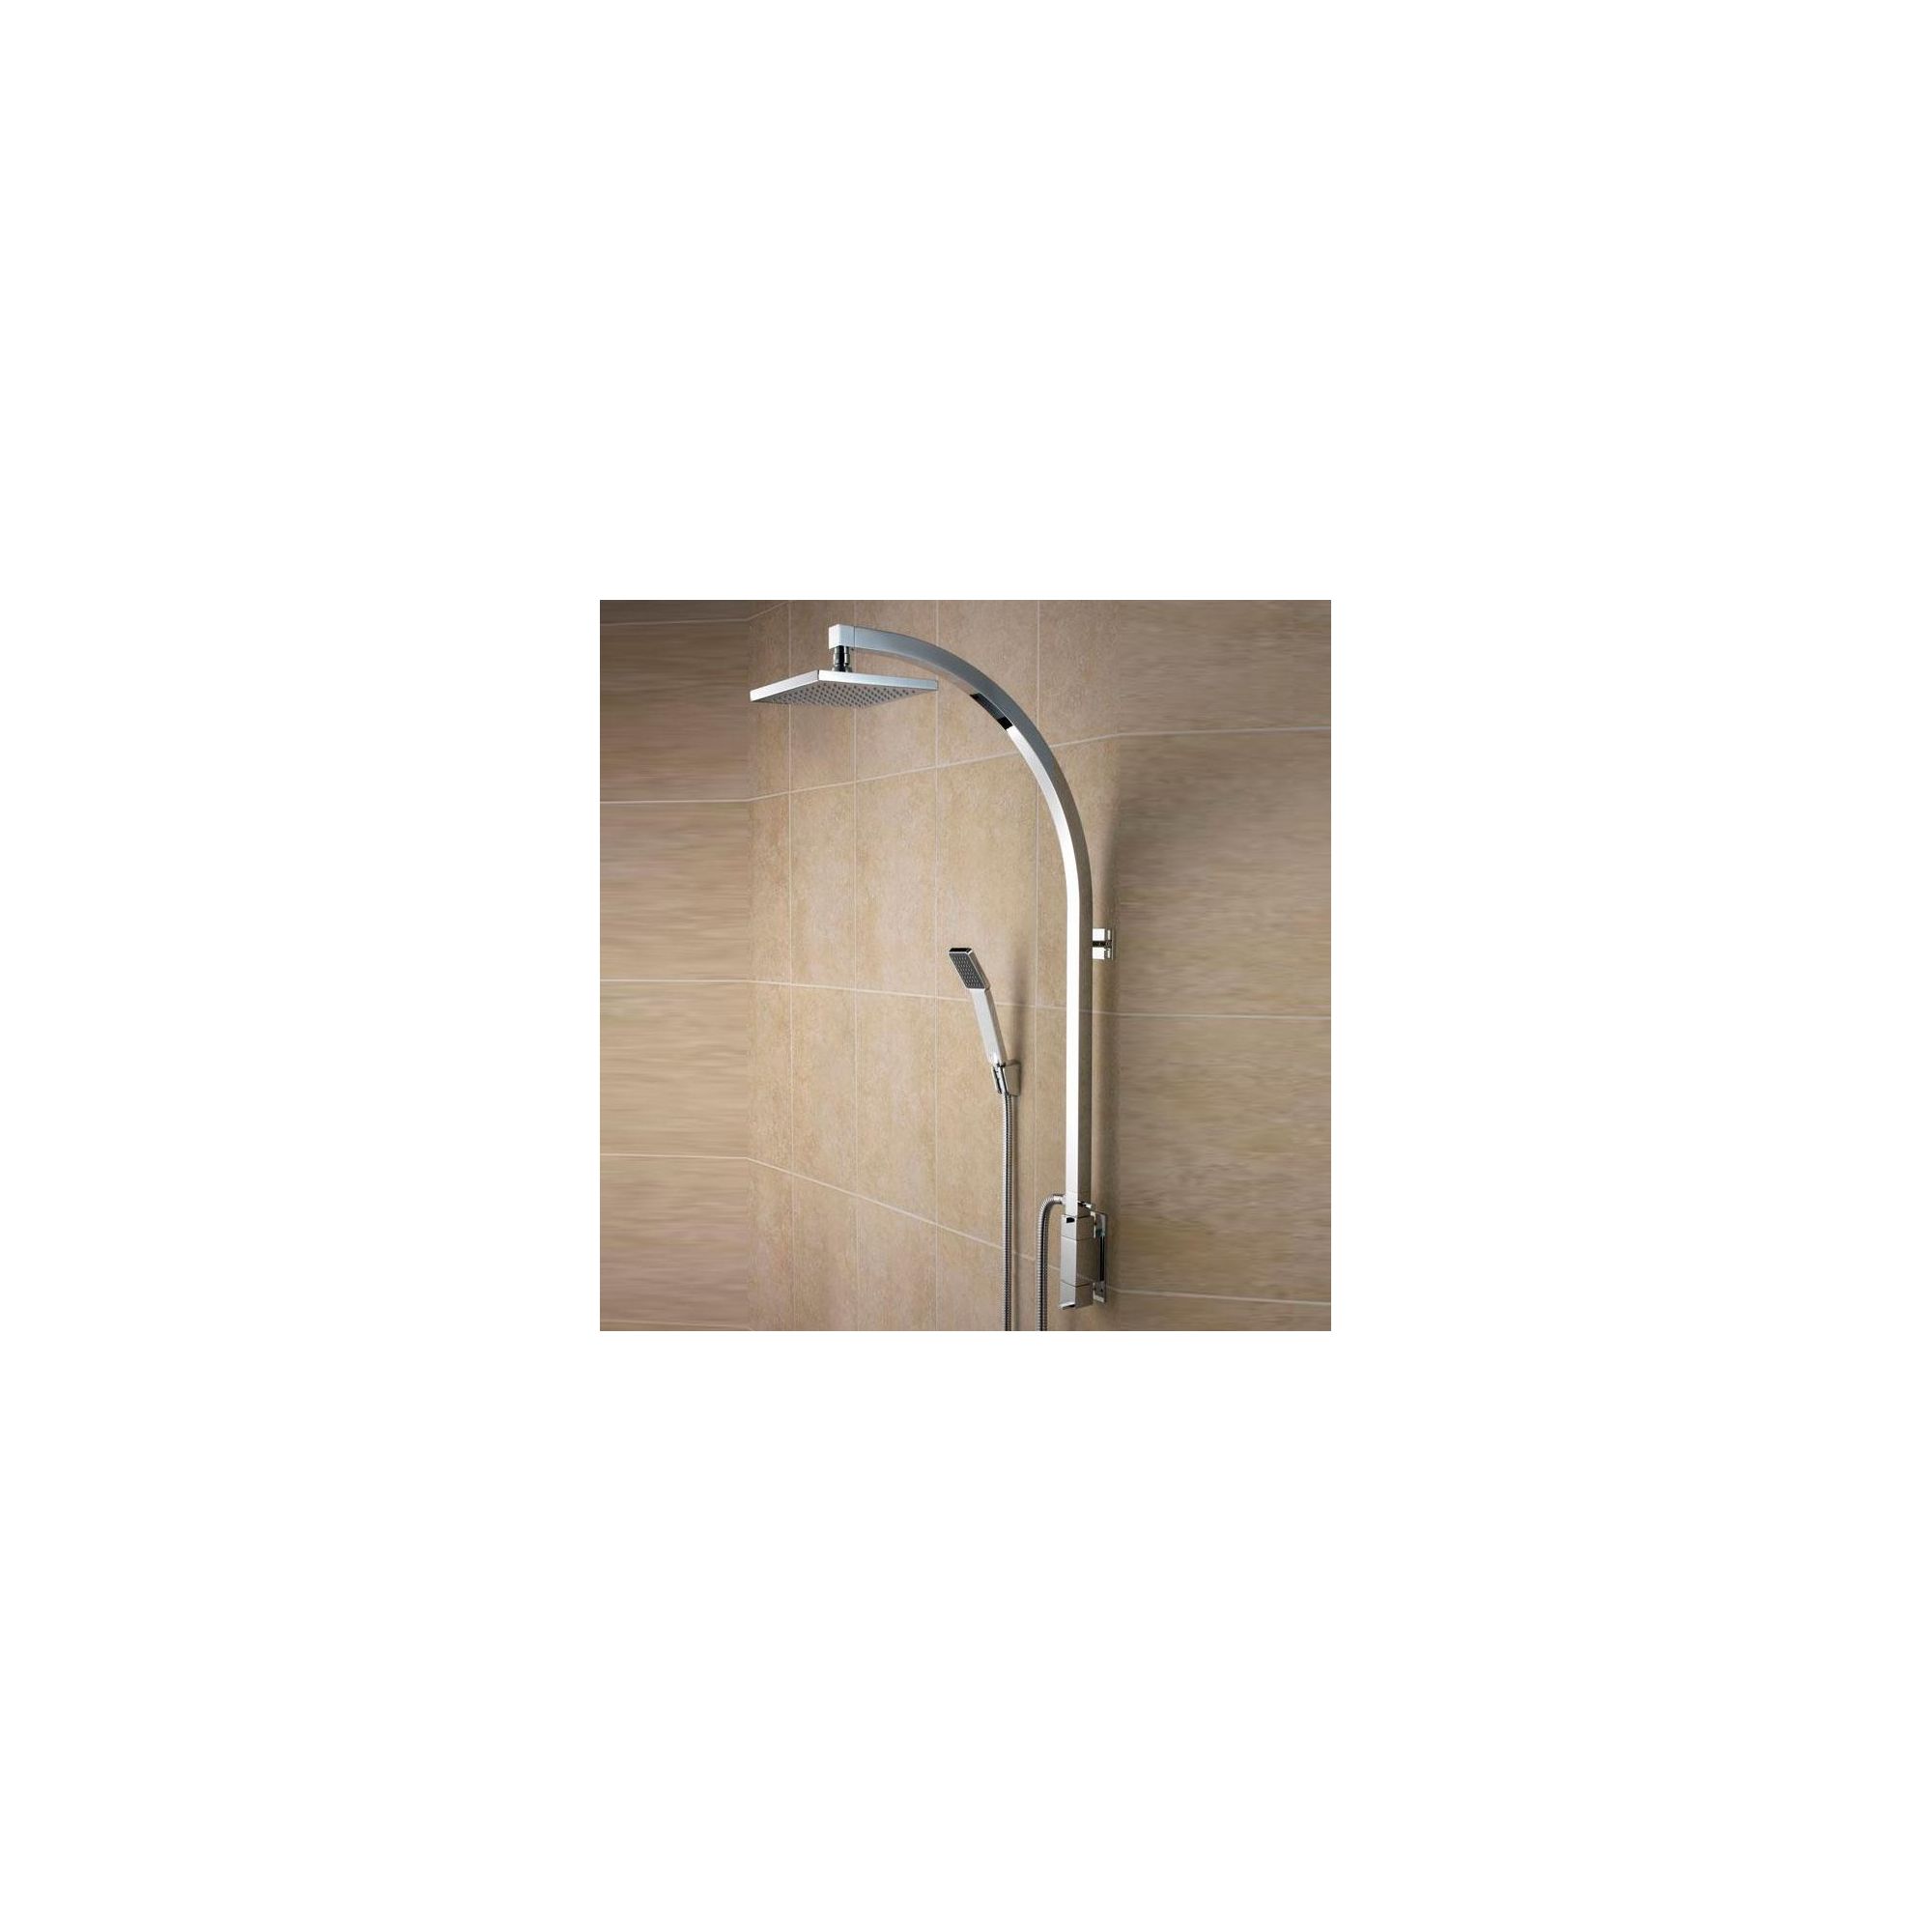 Bristan Qube Inline Vertical Shower Pole with Integral Diverter to Handset Chrome at Tesco Direct